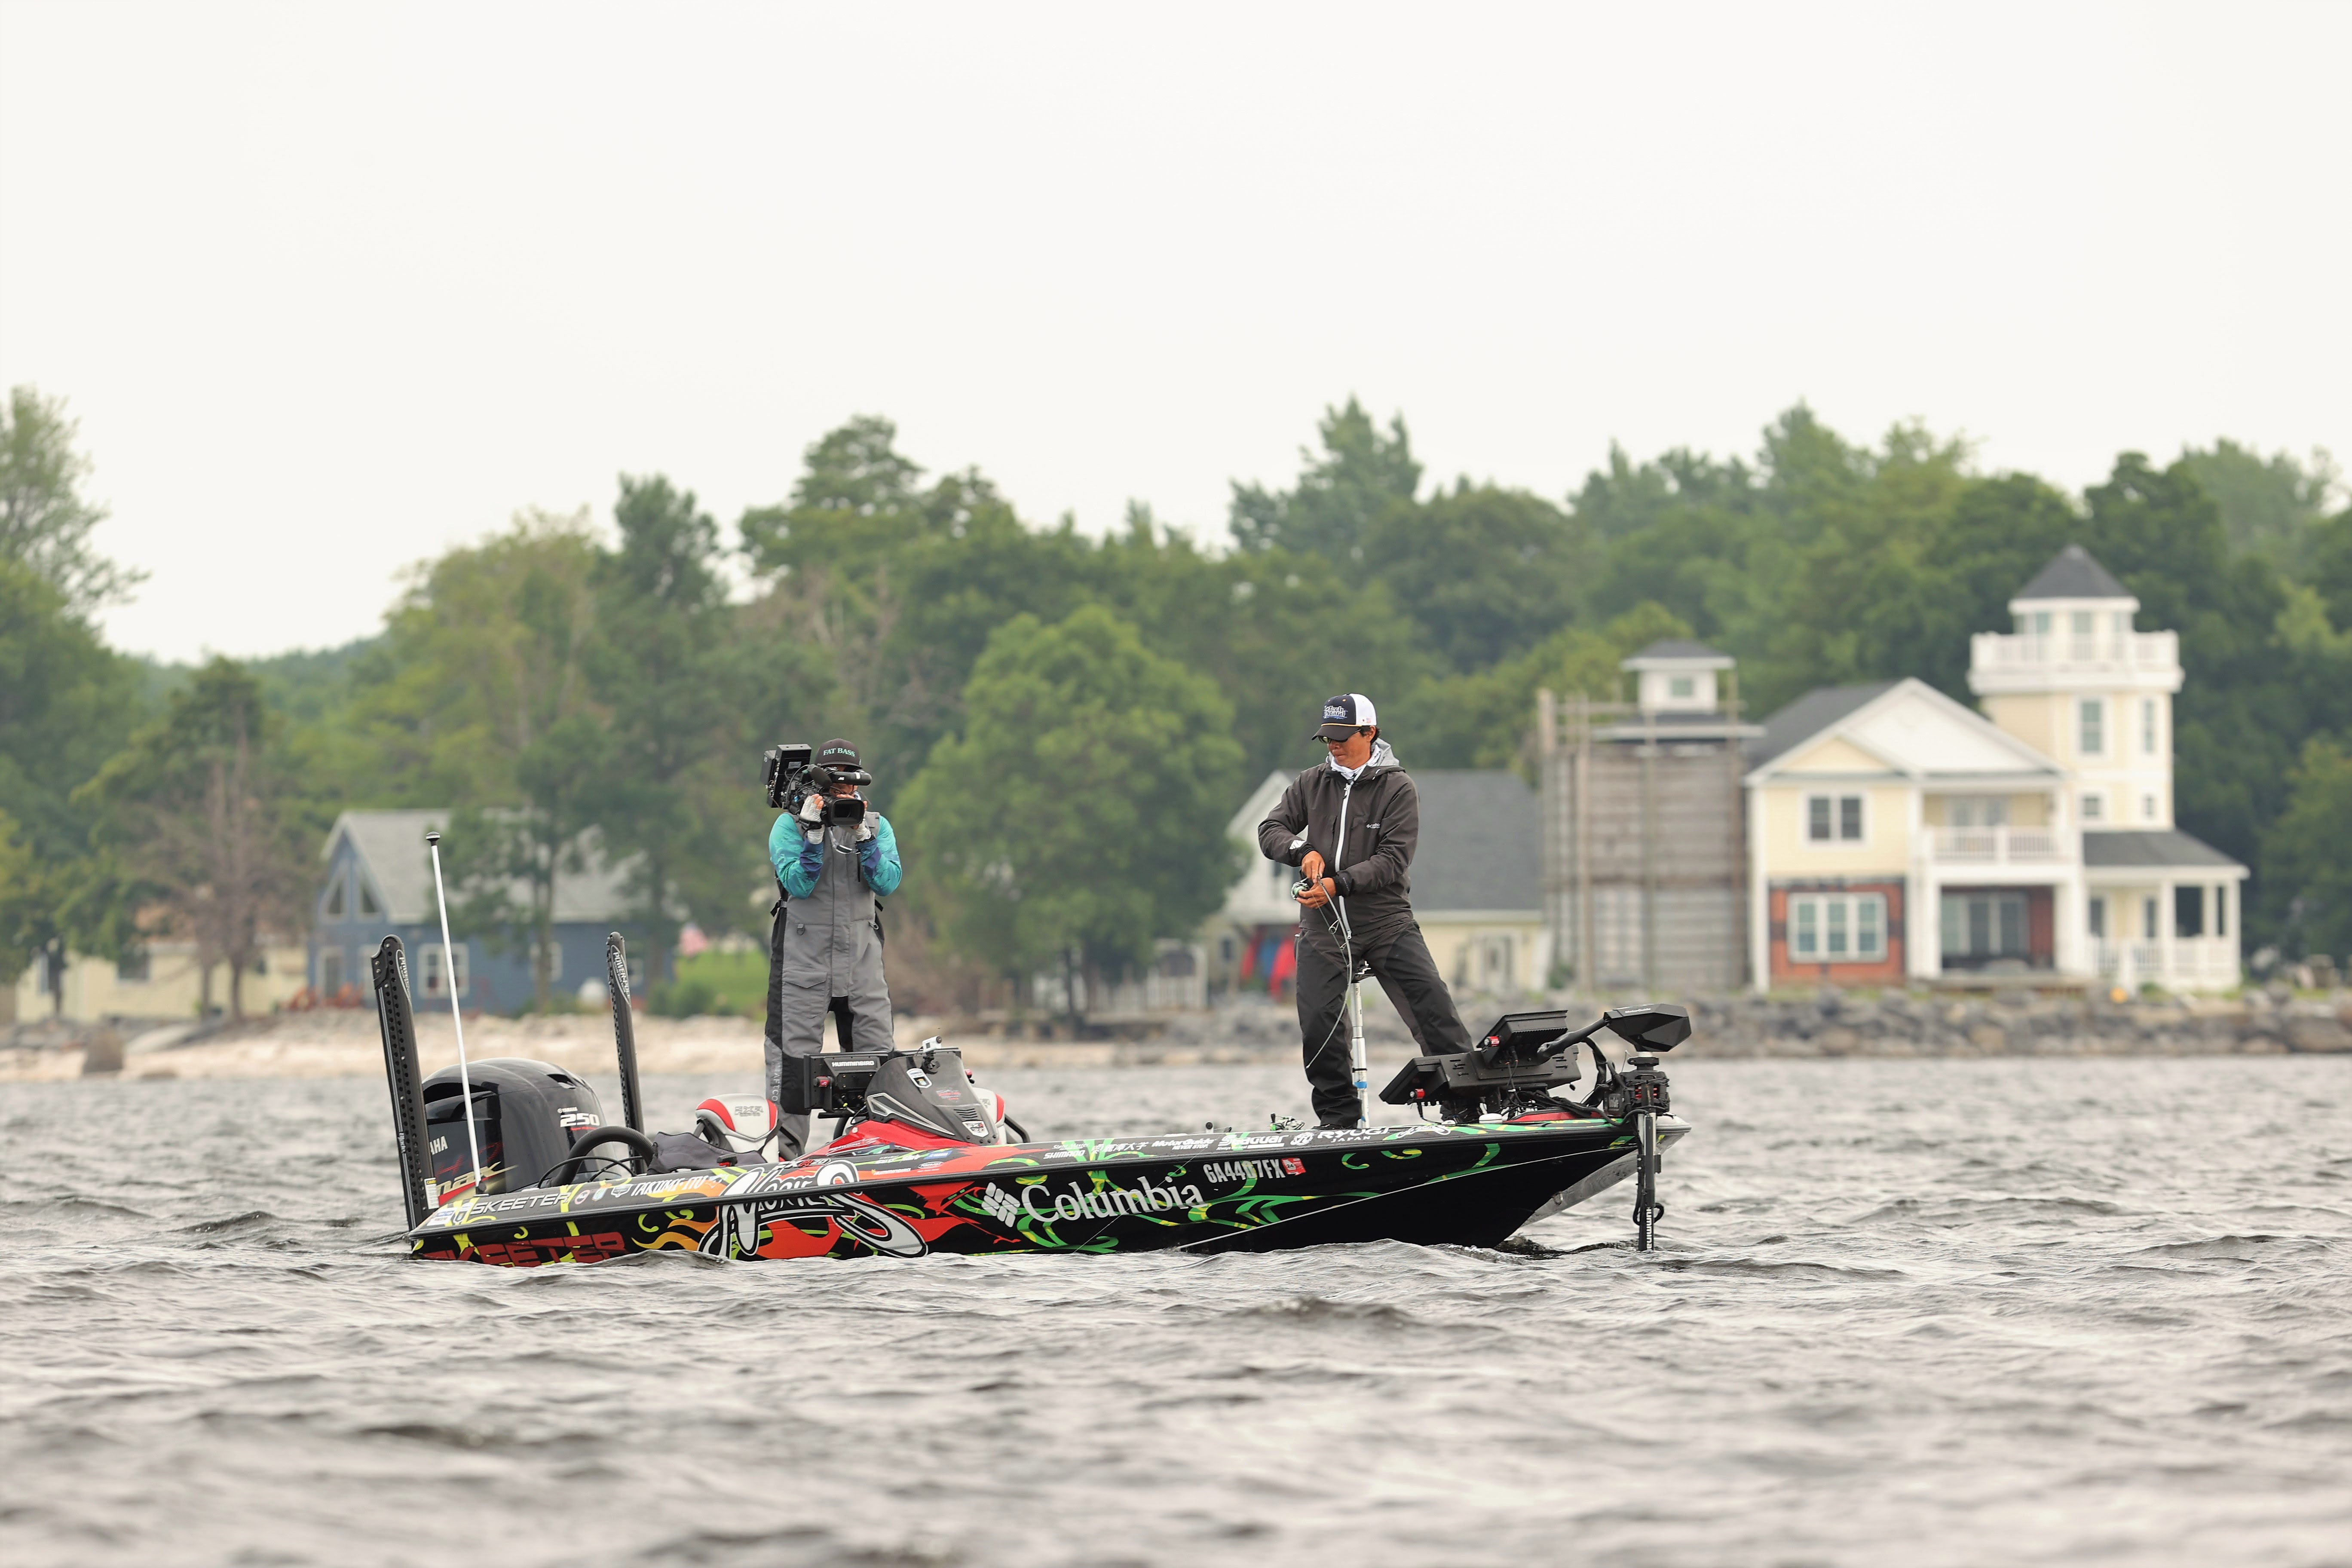 Options abound for Elite Series event on St. Lawrence River - Bassmaster